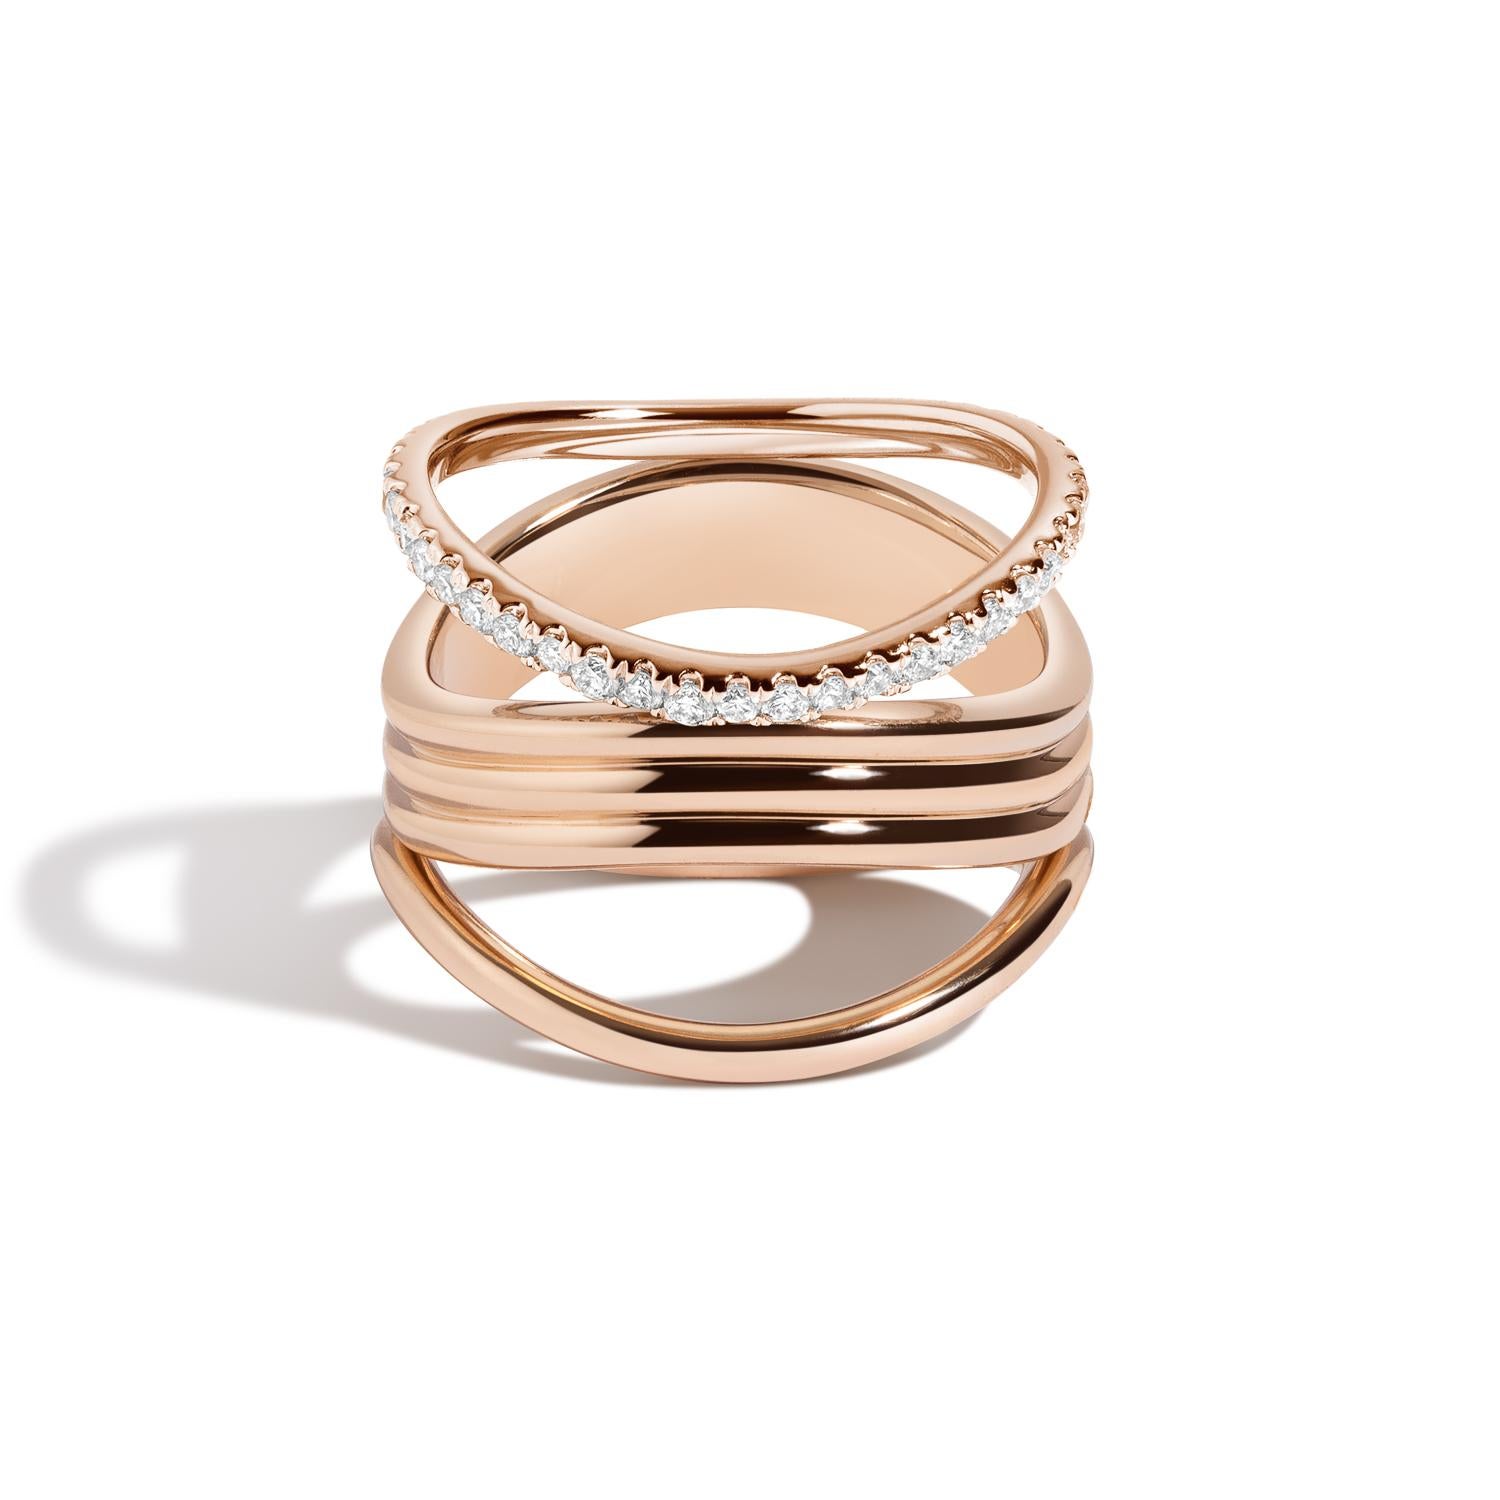 Bossa Nova Trio Ring in 14 Karat Rose Gold by Selin Kent In New Condition For Sale In New York, NY